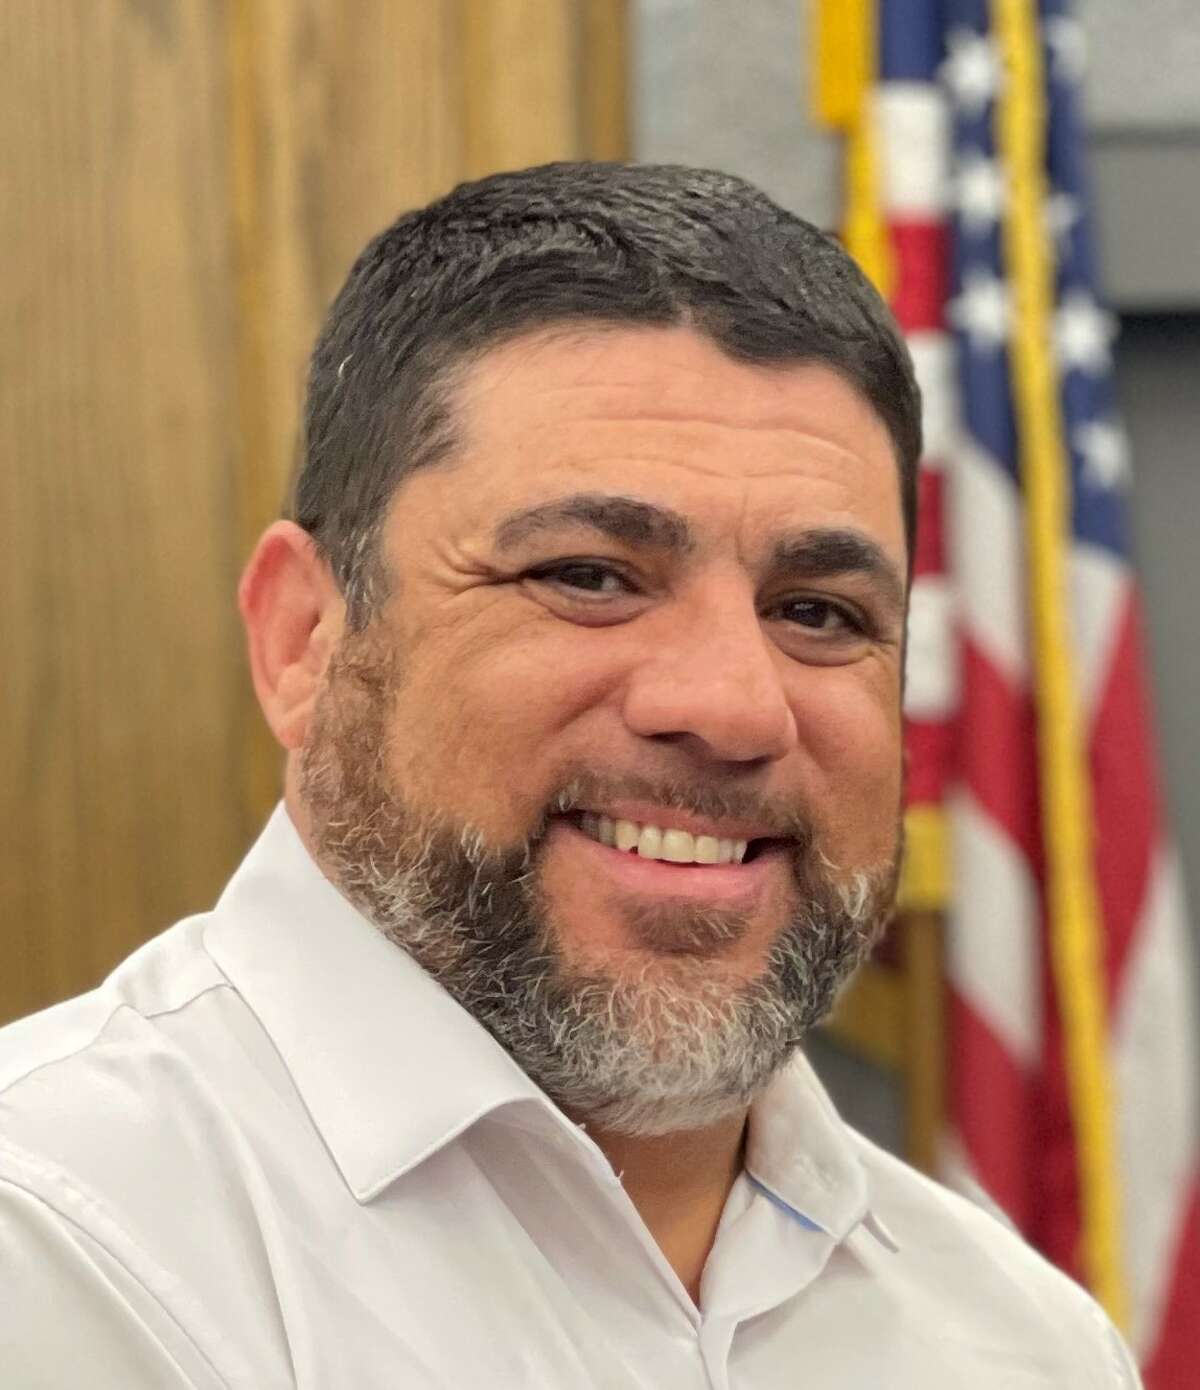 Jesus Santiago will become the new director of the Schenectady County Veterans Service Agency effective April 1, 2023.